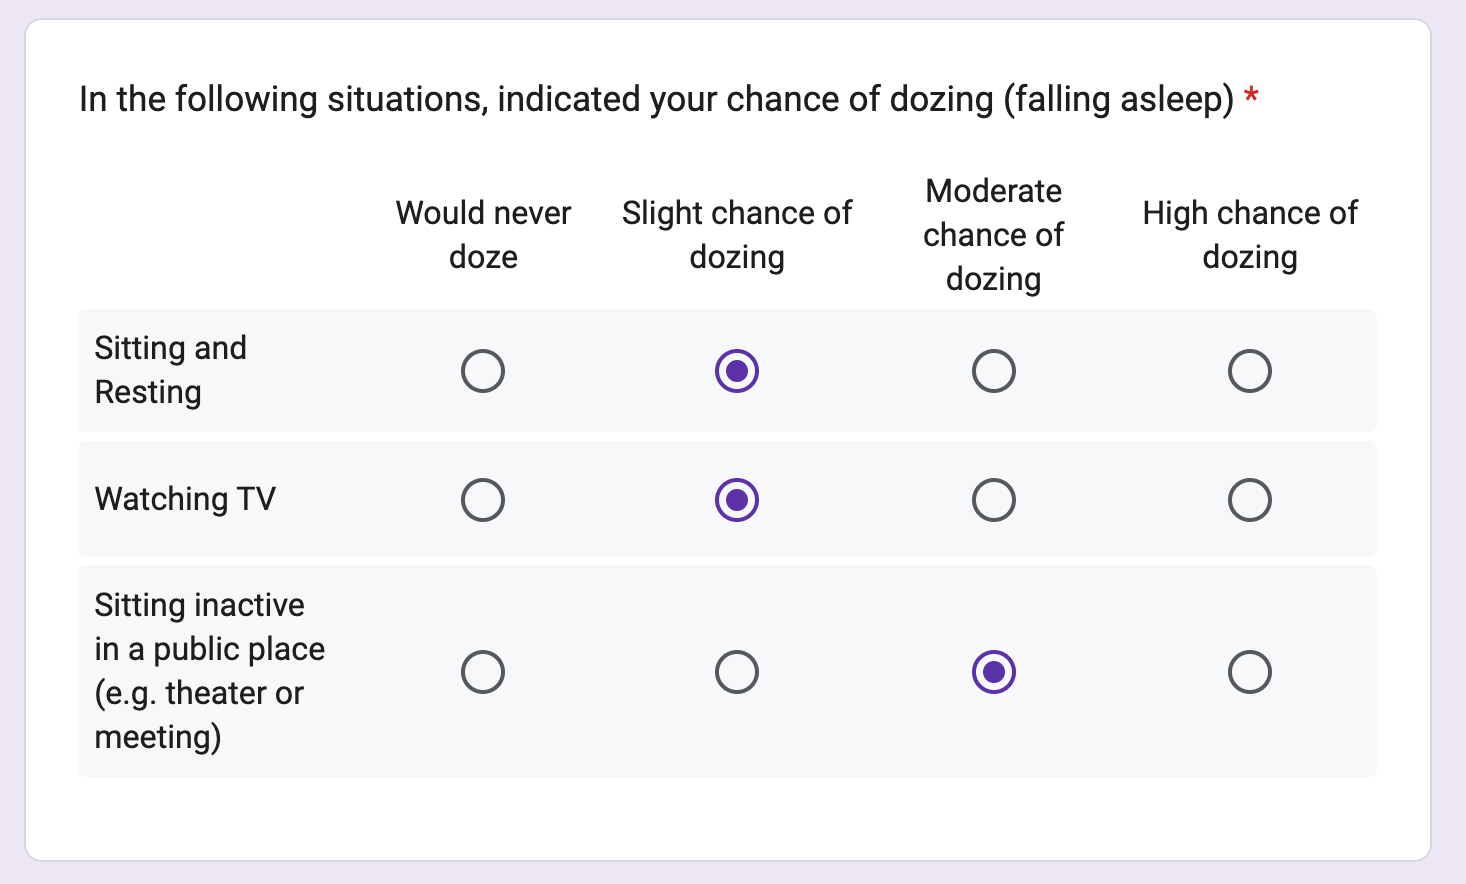 Example of a multiple choice grid survey question